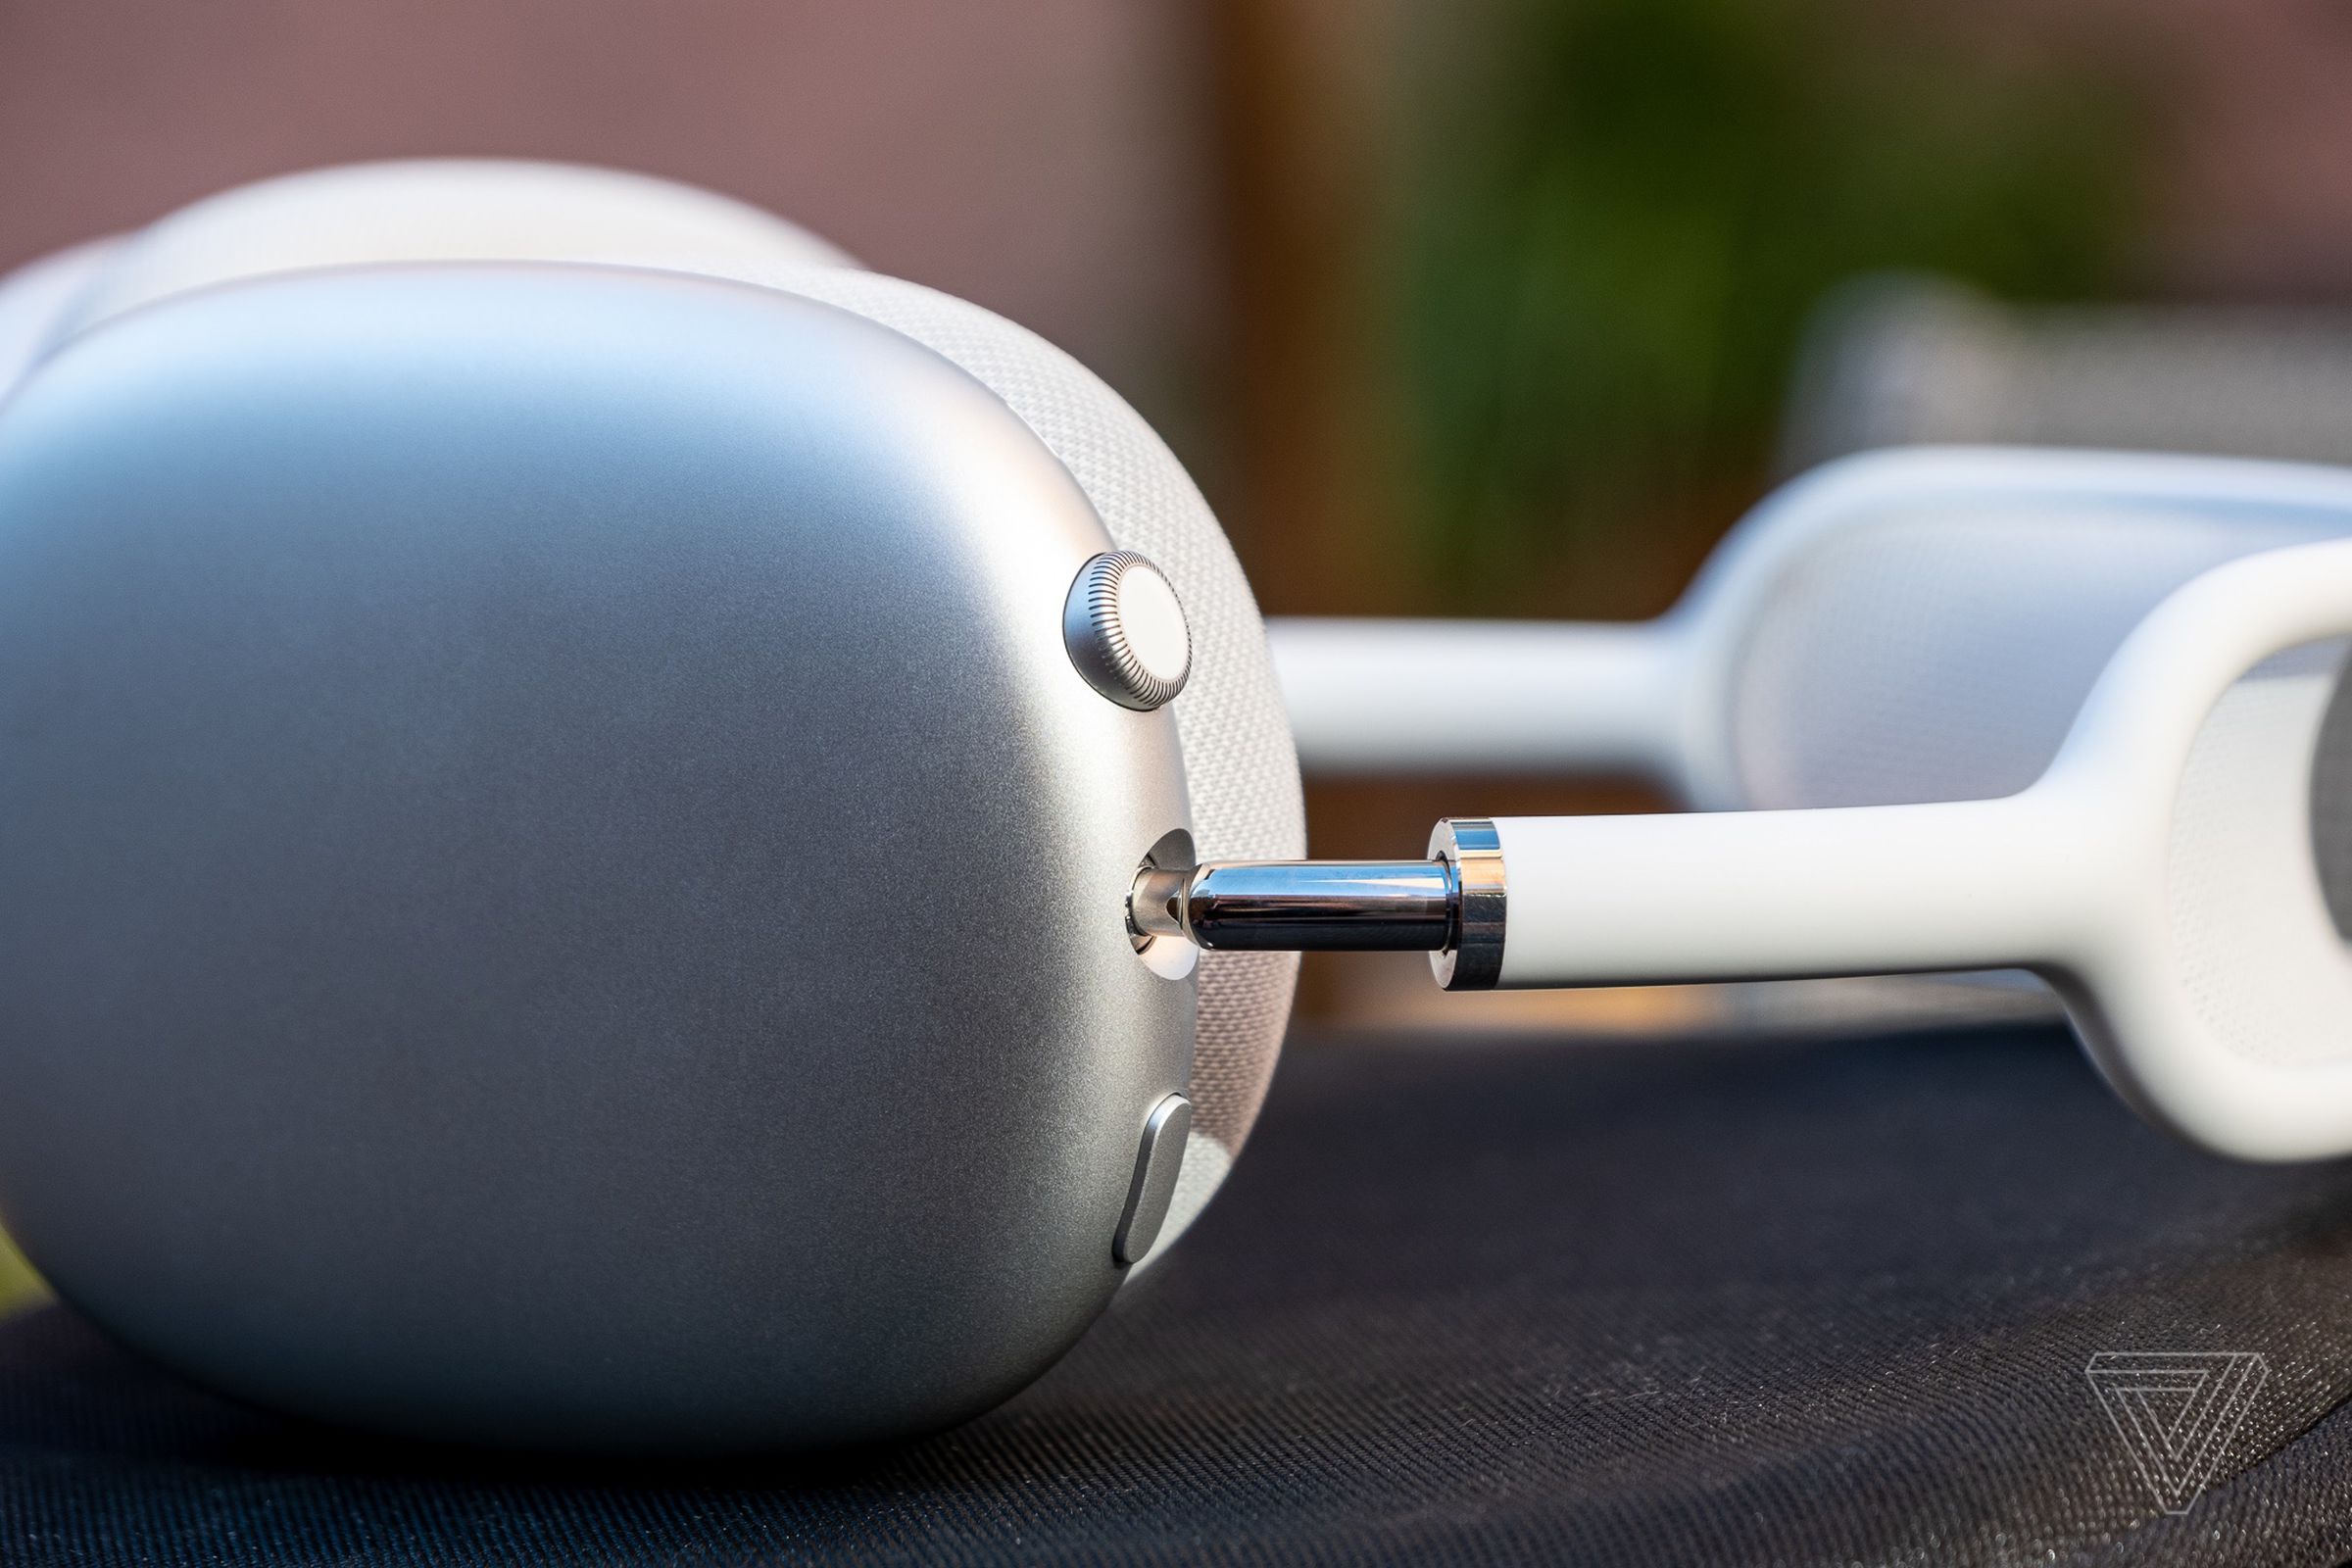 A close up of the Digital Crown on a silver pair of Apple AirPods Max earbuds.